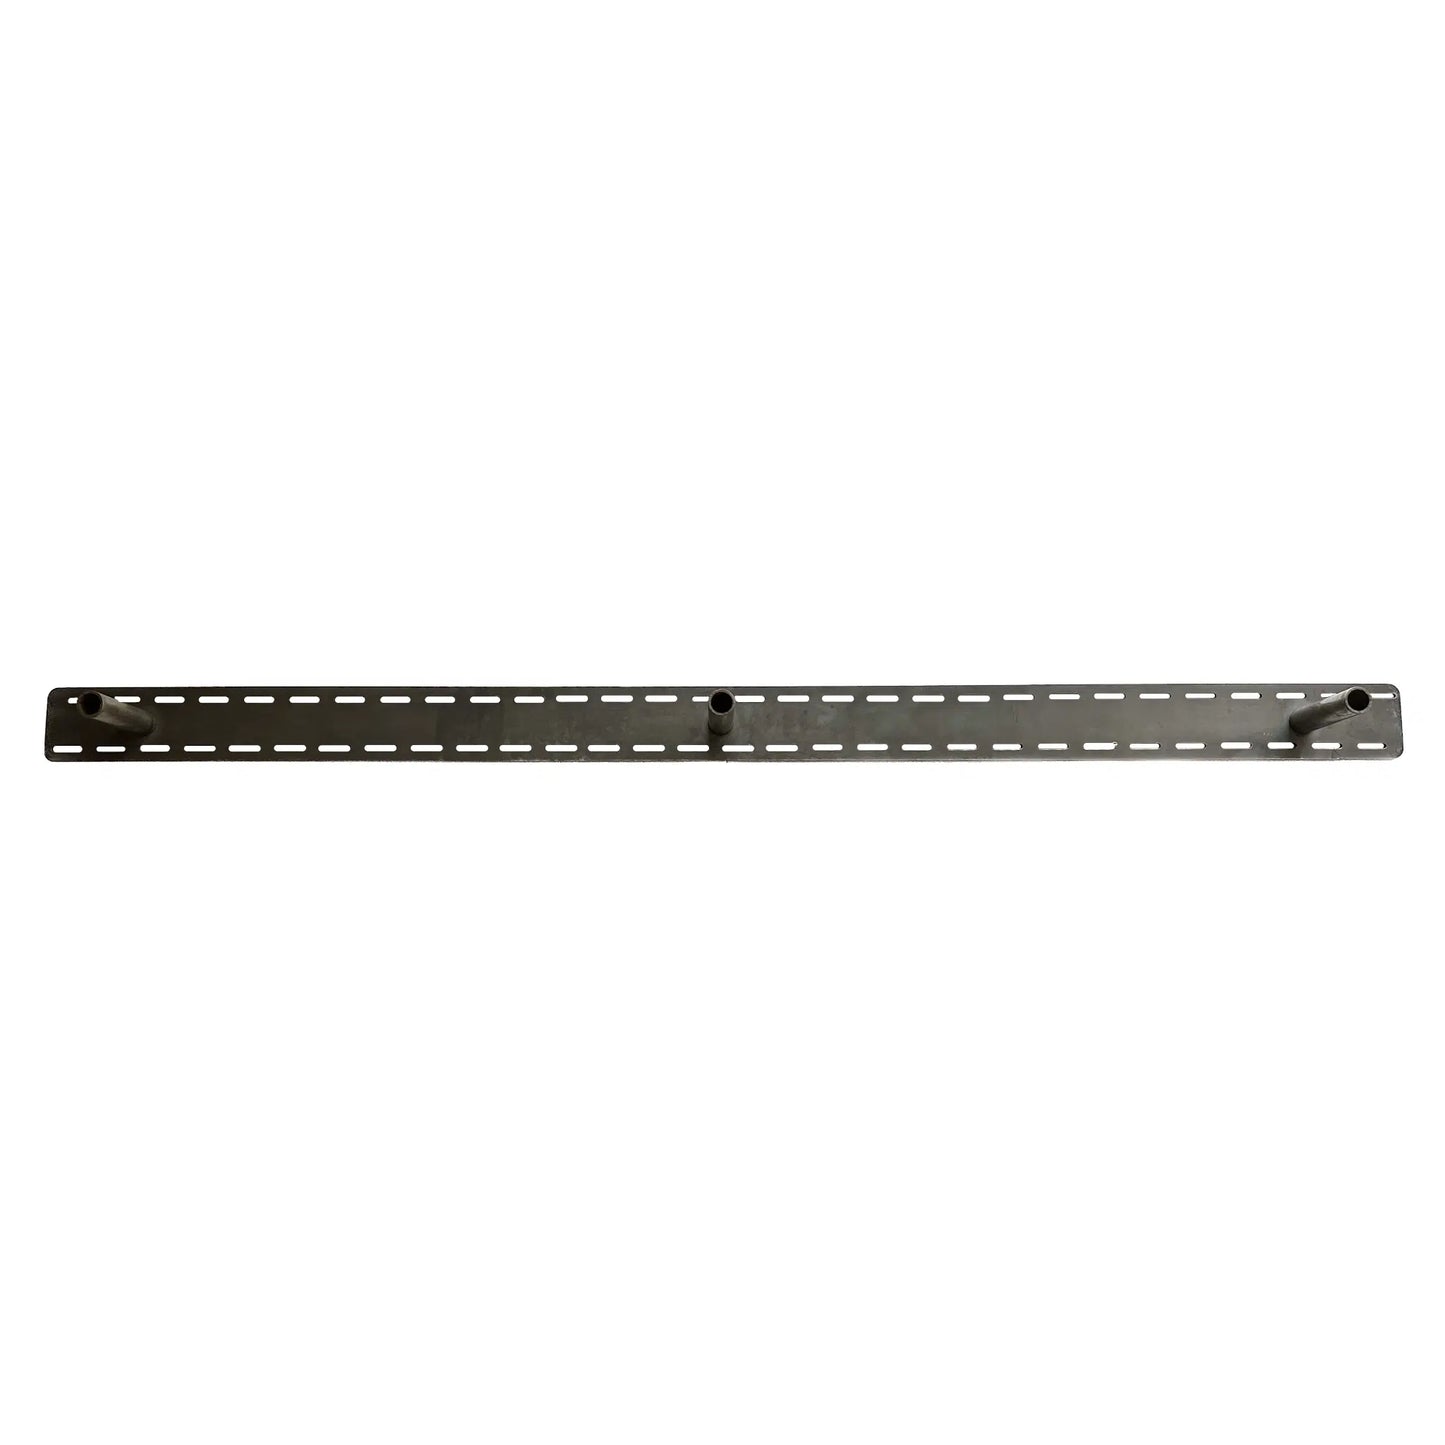 steel floating bracket  shown face forward with a plate on the back and slots for screws around the perimeter of the plate. Three rods extend out from the plate that will go into the mantel or shelf for mounting.